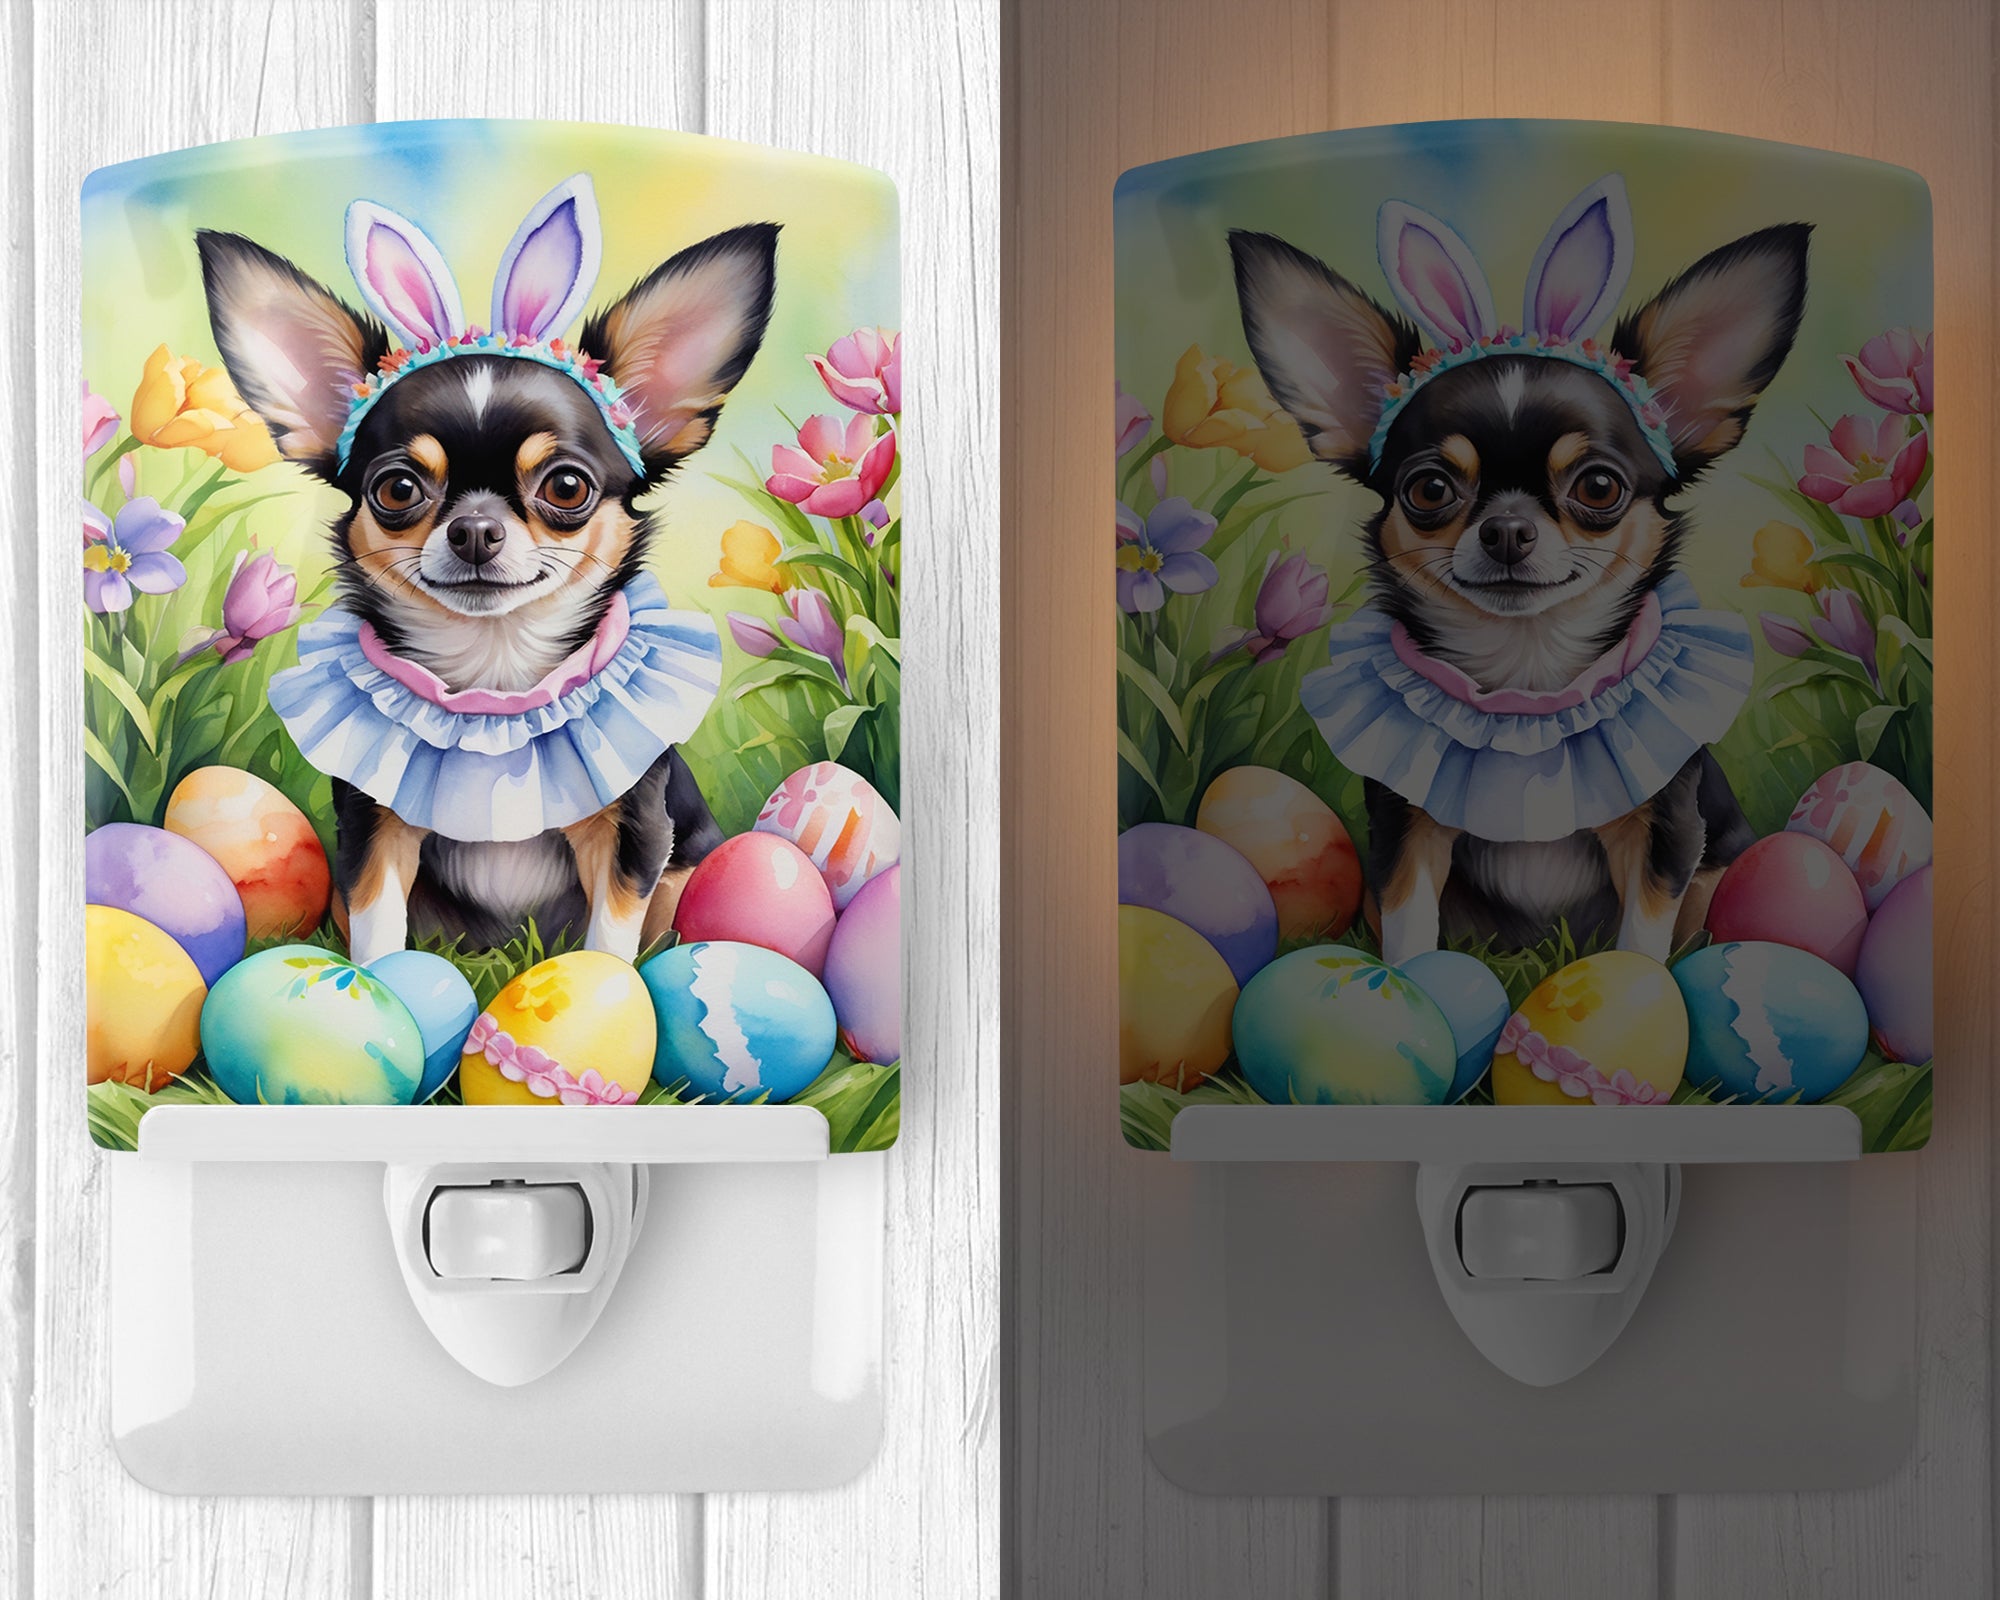 Buy this Chihuahua Easter Egg Hunt Ceramic Night Light